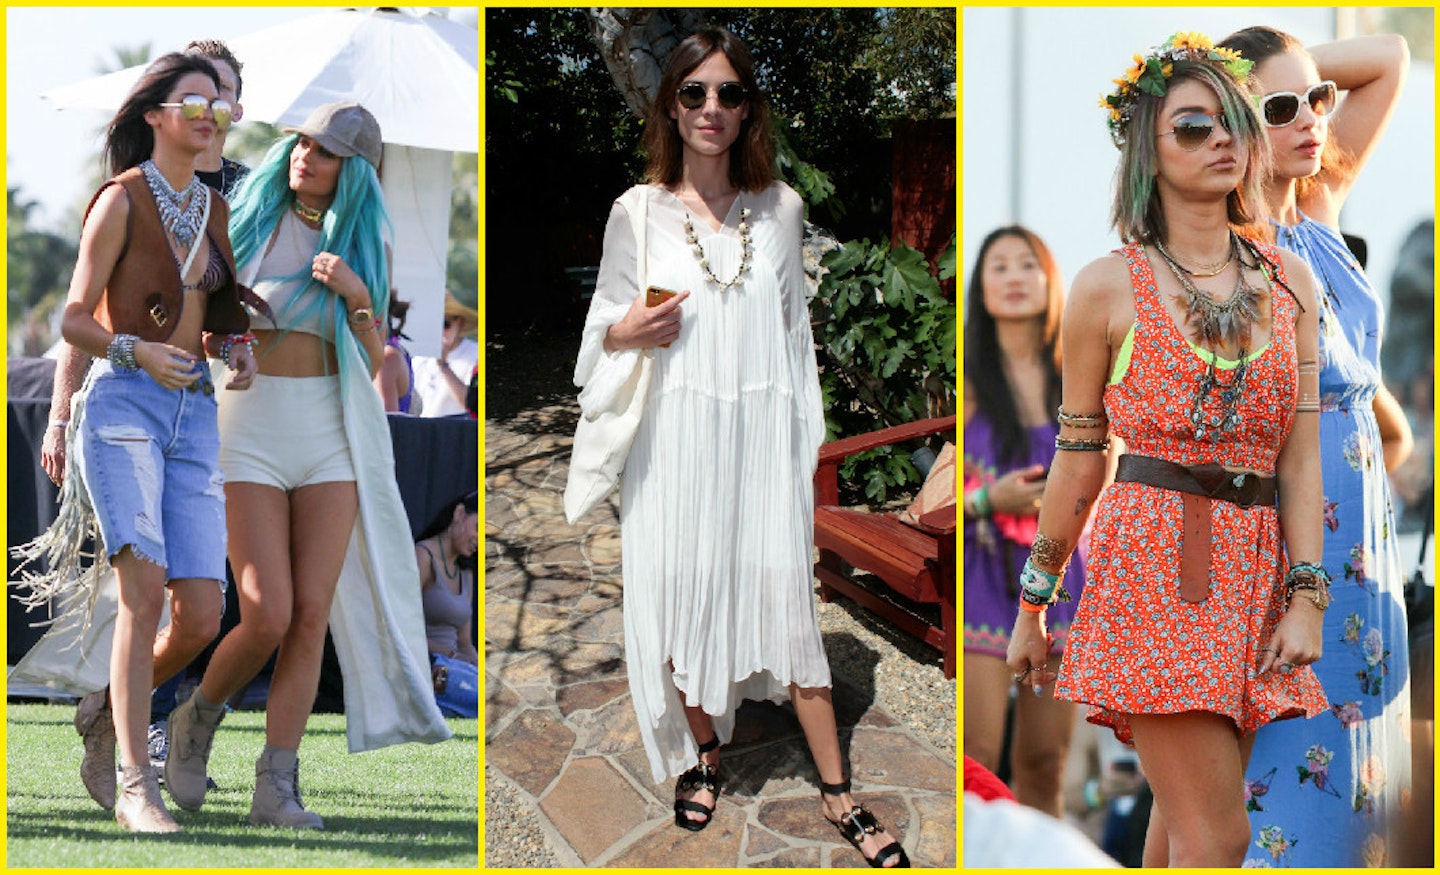 4 bags for 4 Coachella-inspired looks you will want to check out!